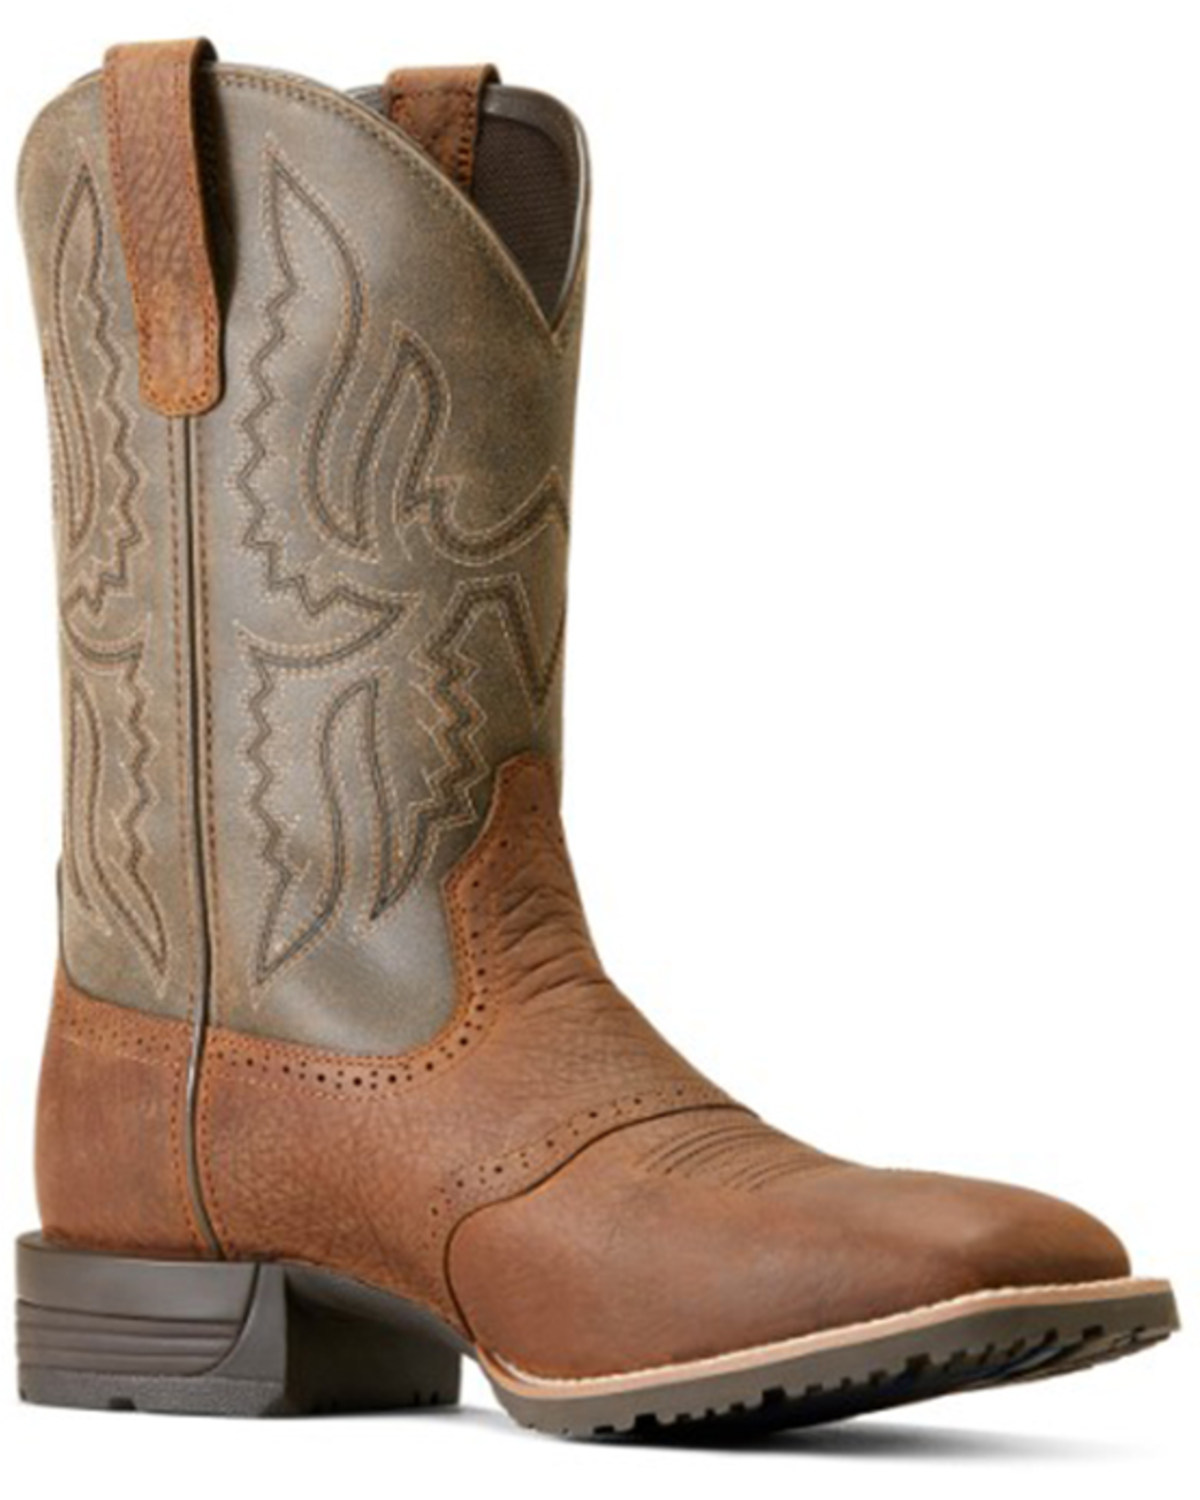 Ariat Men's Hybrid Ranchway Performance Western Boots - Broad Square Toe